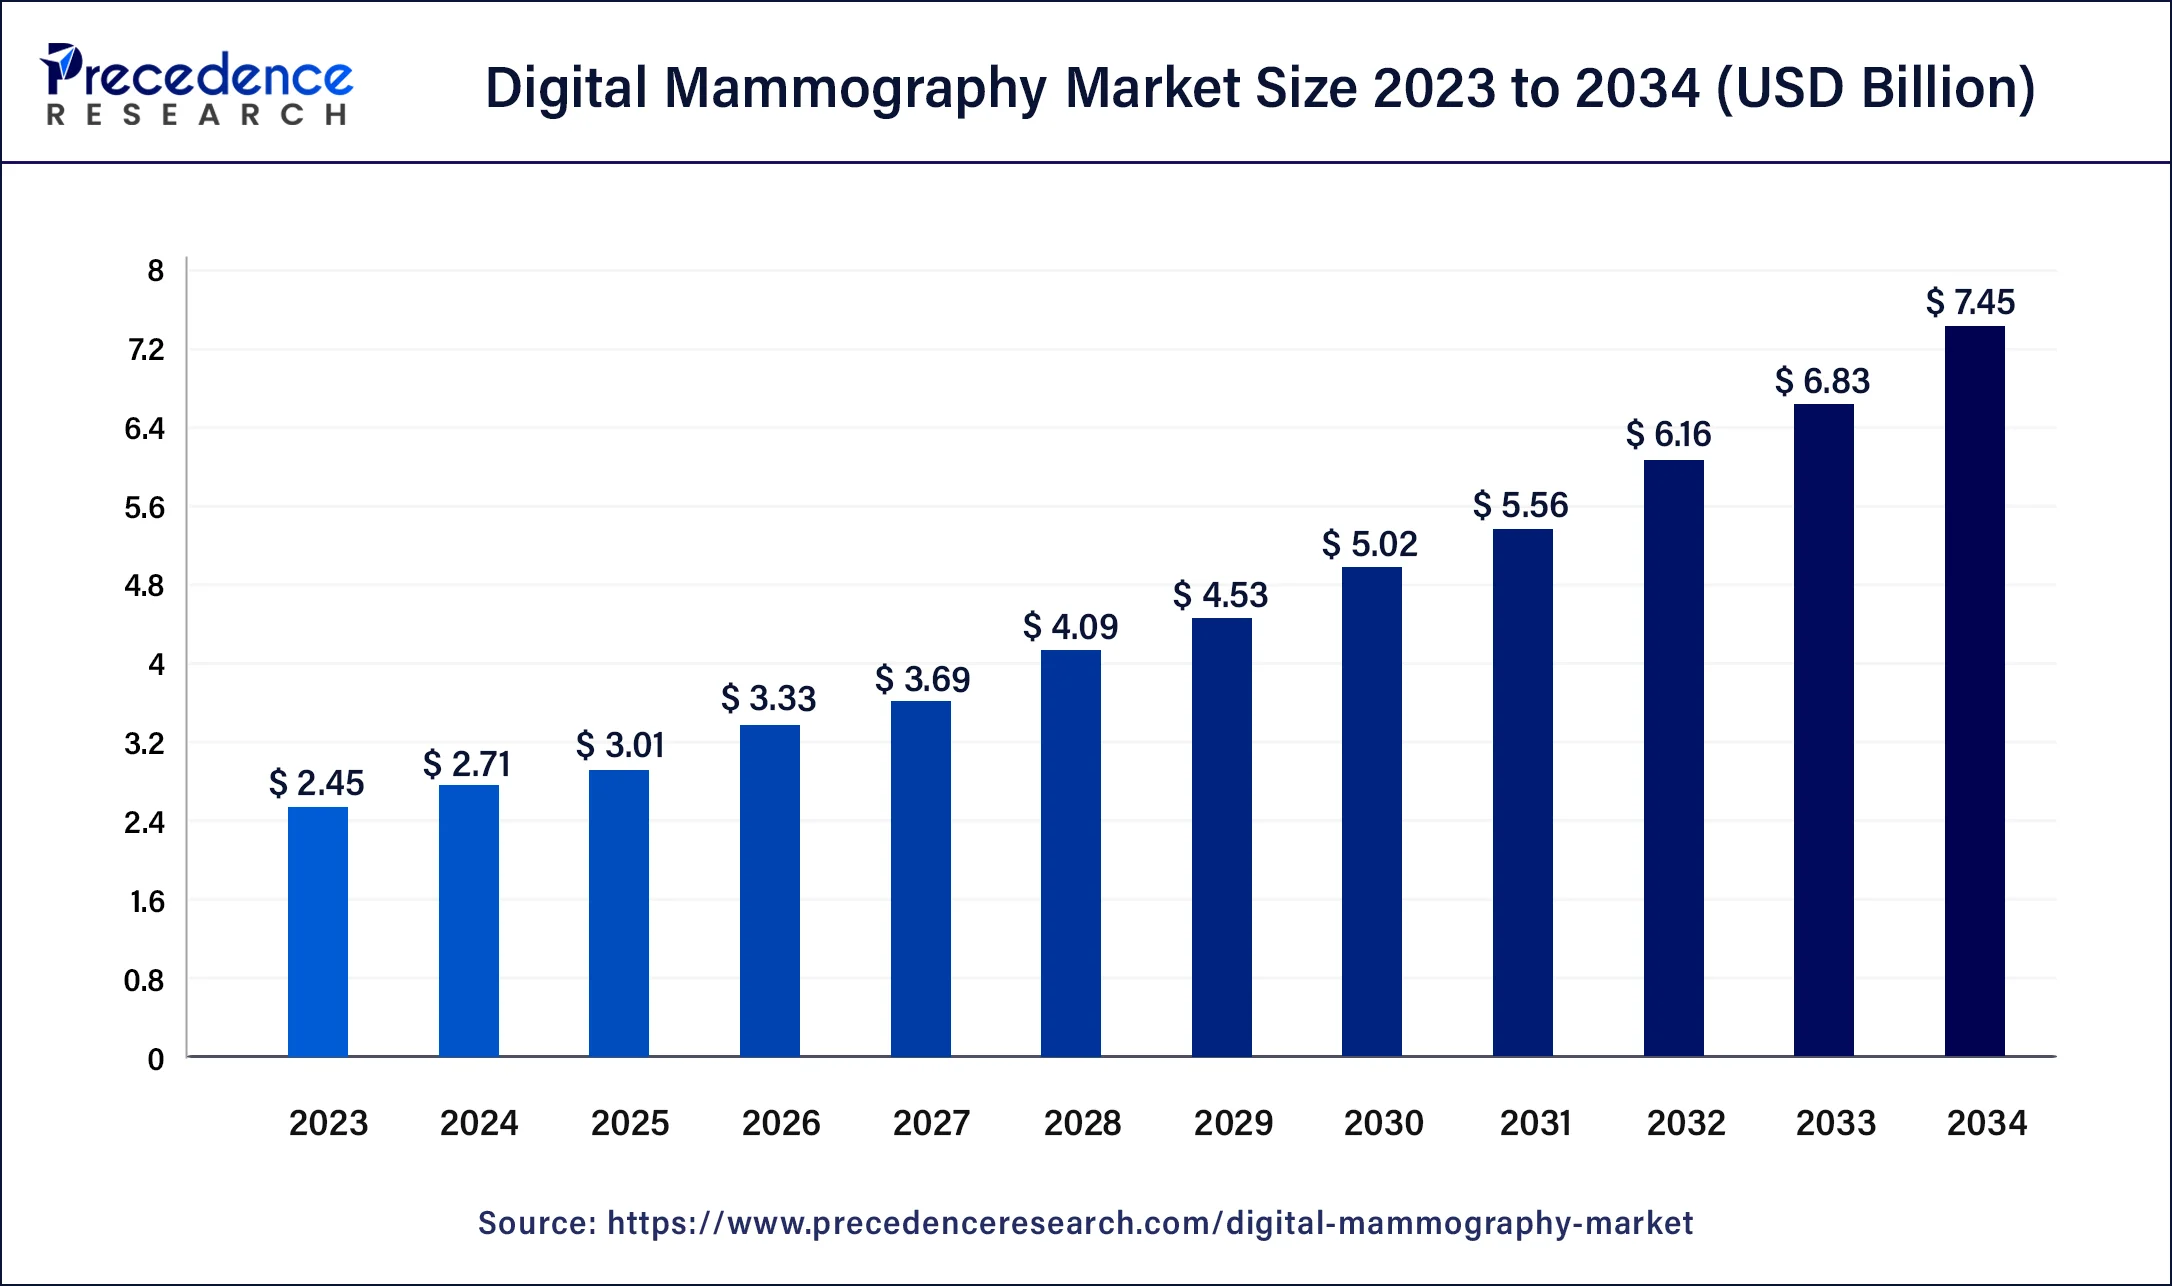 Digital Mammography Market Size 2024 to 2034